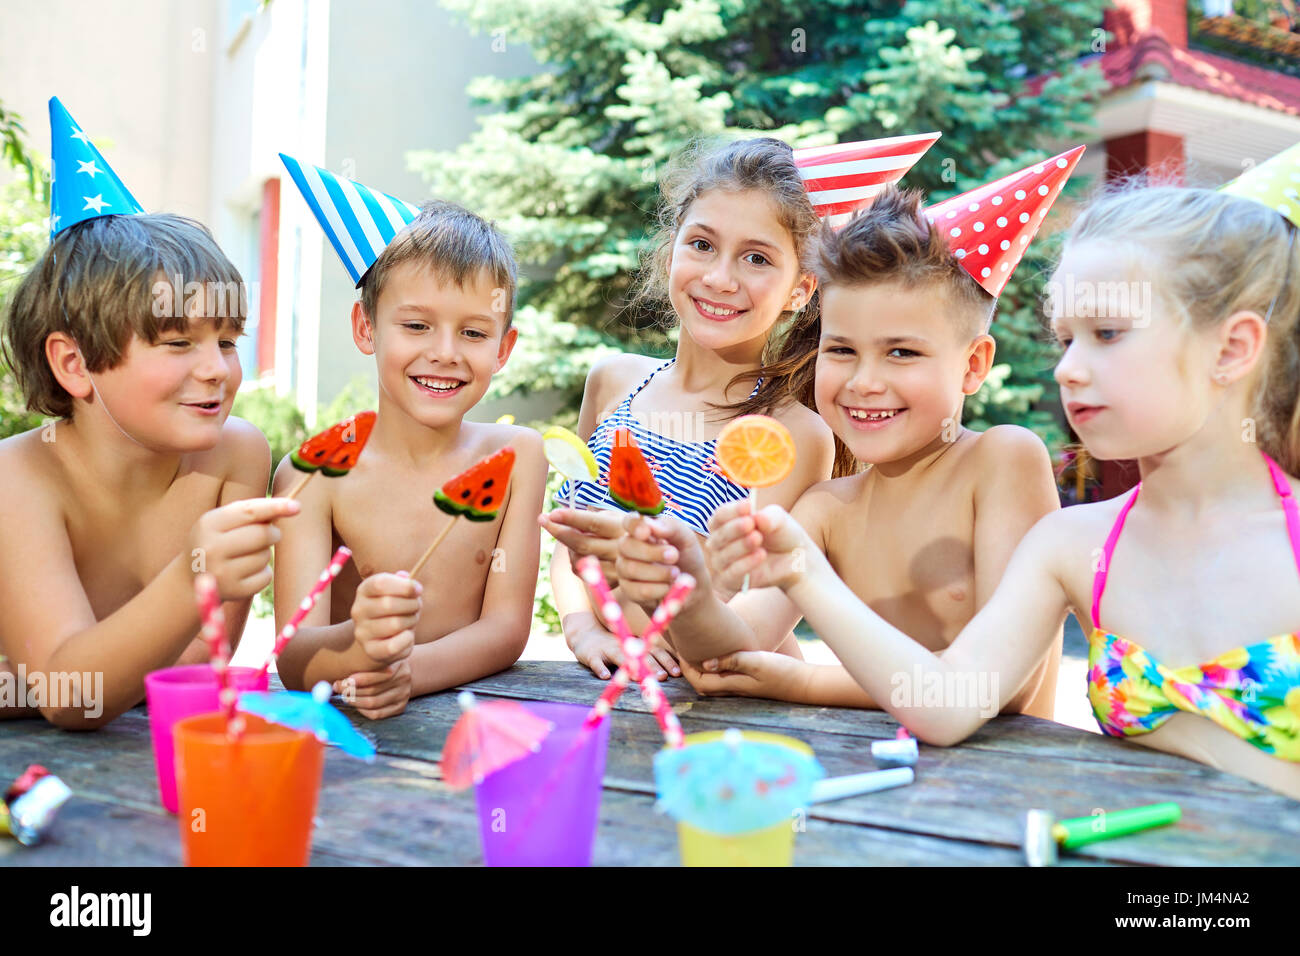 Birthday. Happy children in hats with candy.  Stock Photo